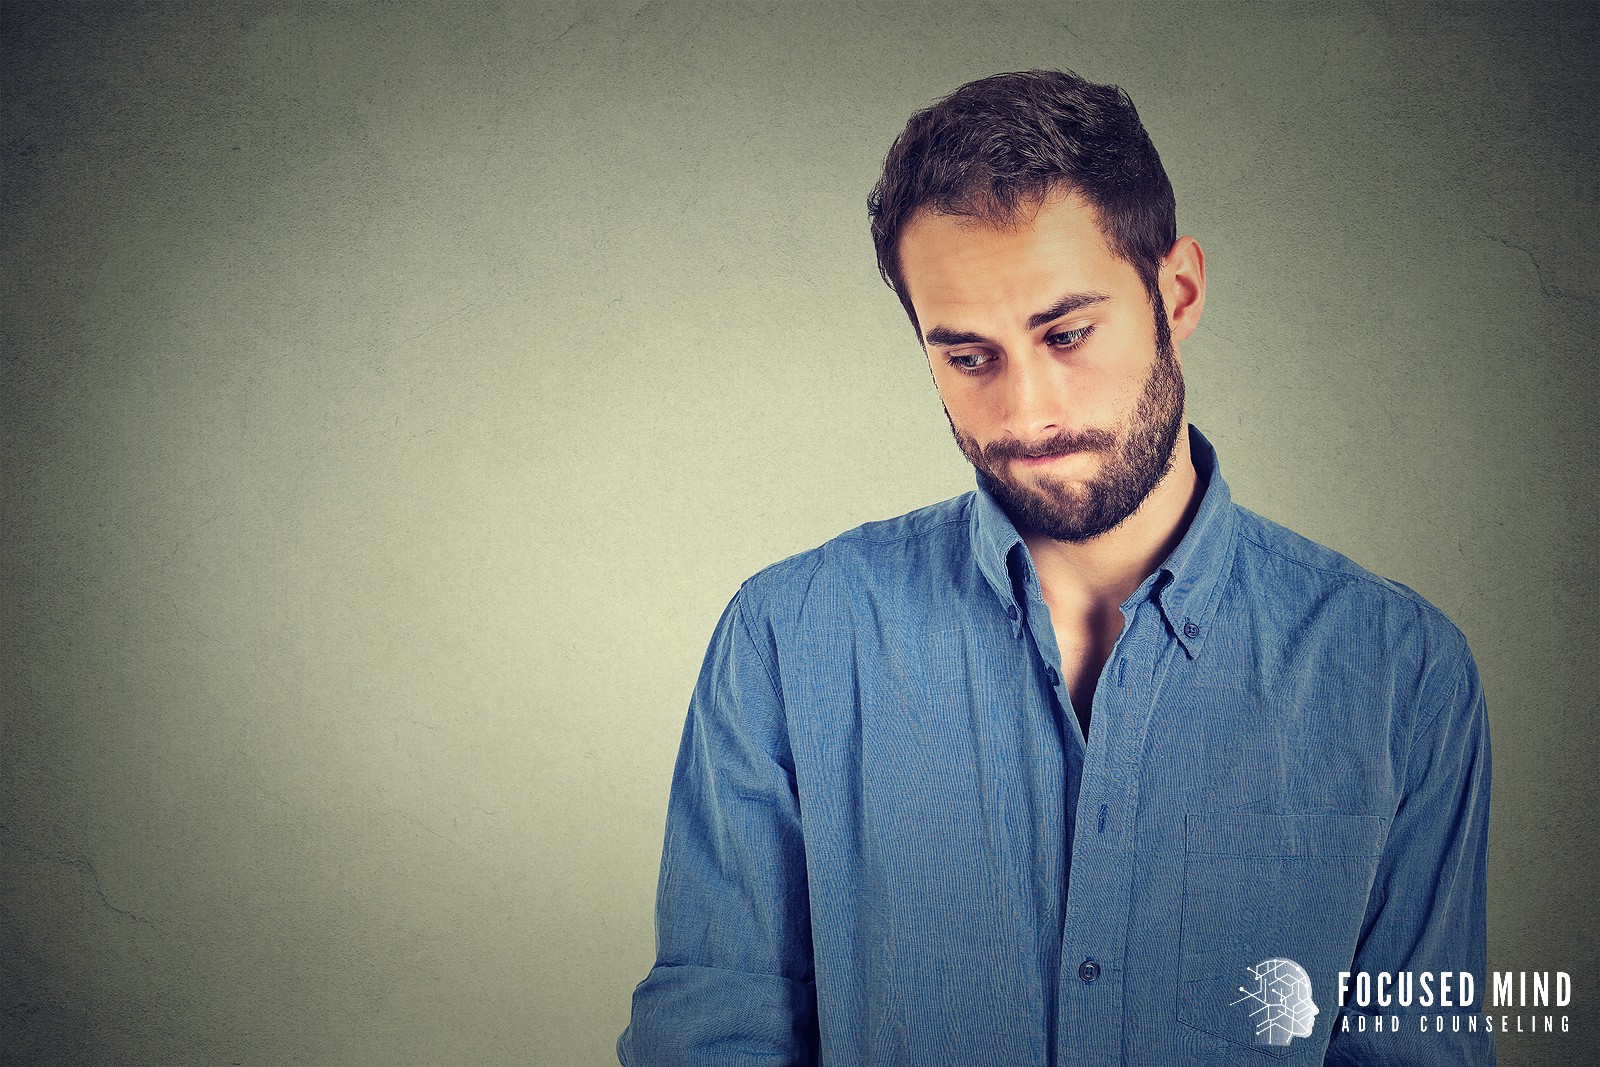 A man stares off towards the ground, representing the stress of facing rejection. A therapist in Columbus Ohio can help you overcome these symptoms at Focused Mind ADHD Counseling. Learn more about adult attention deficit hyperactivity disorder treatment in Ohio by searching "ADHD therapist for adults near me".